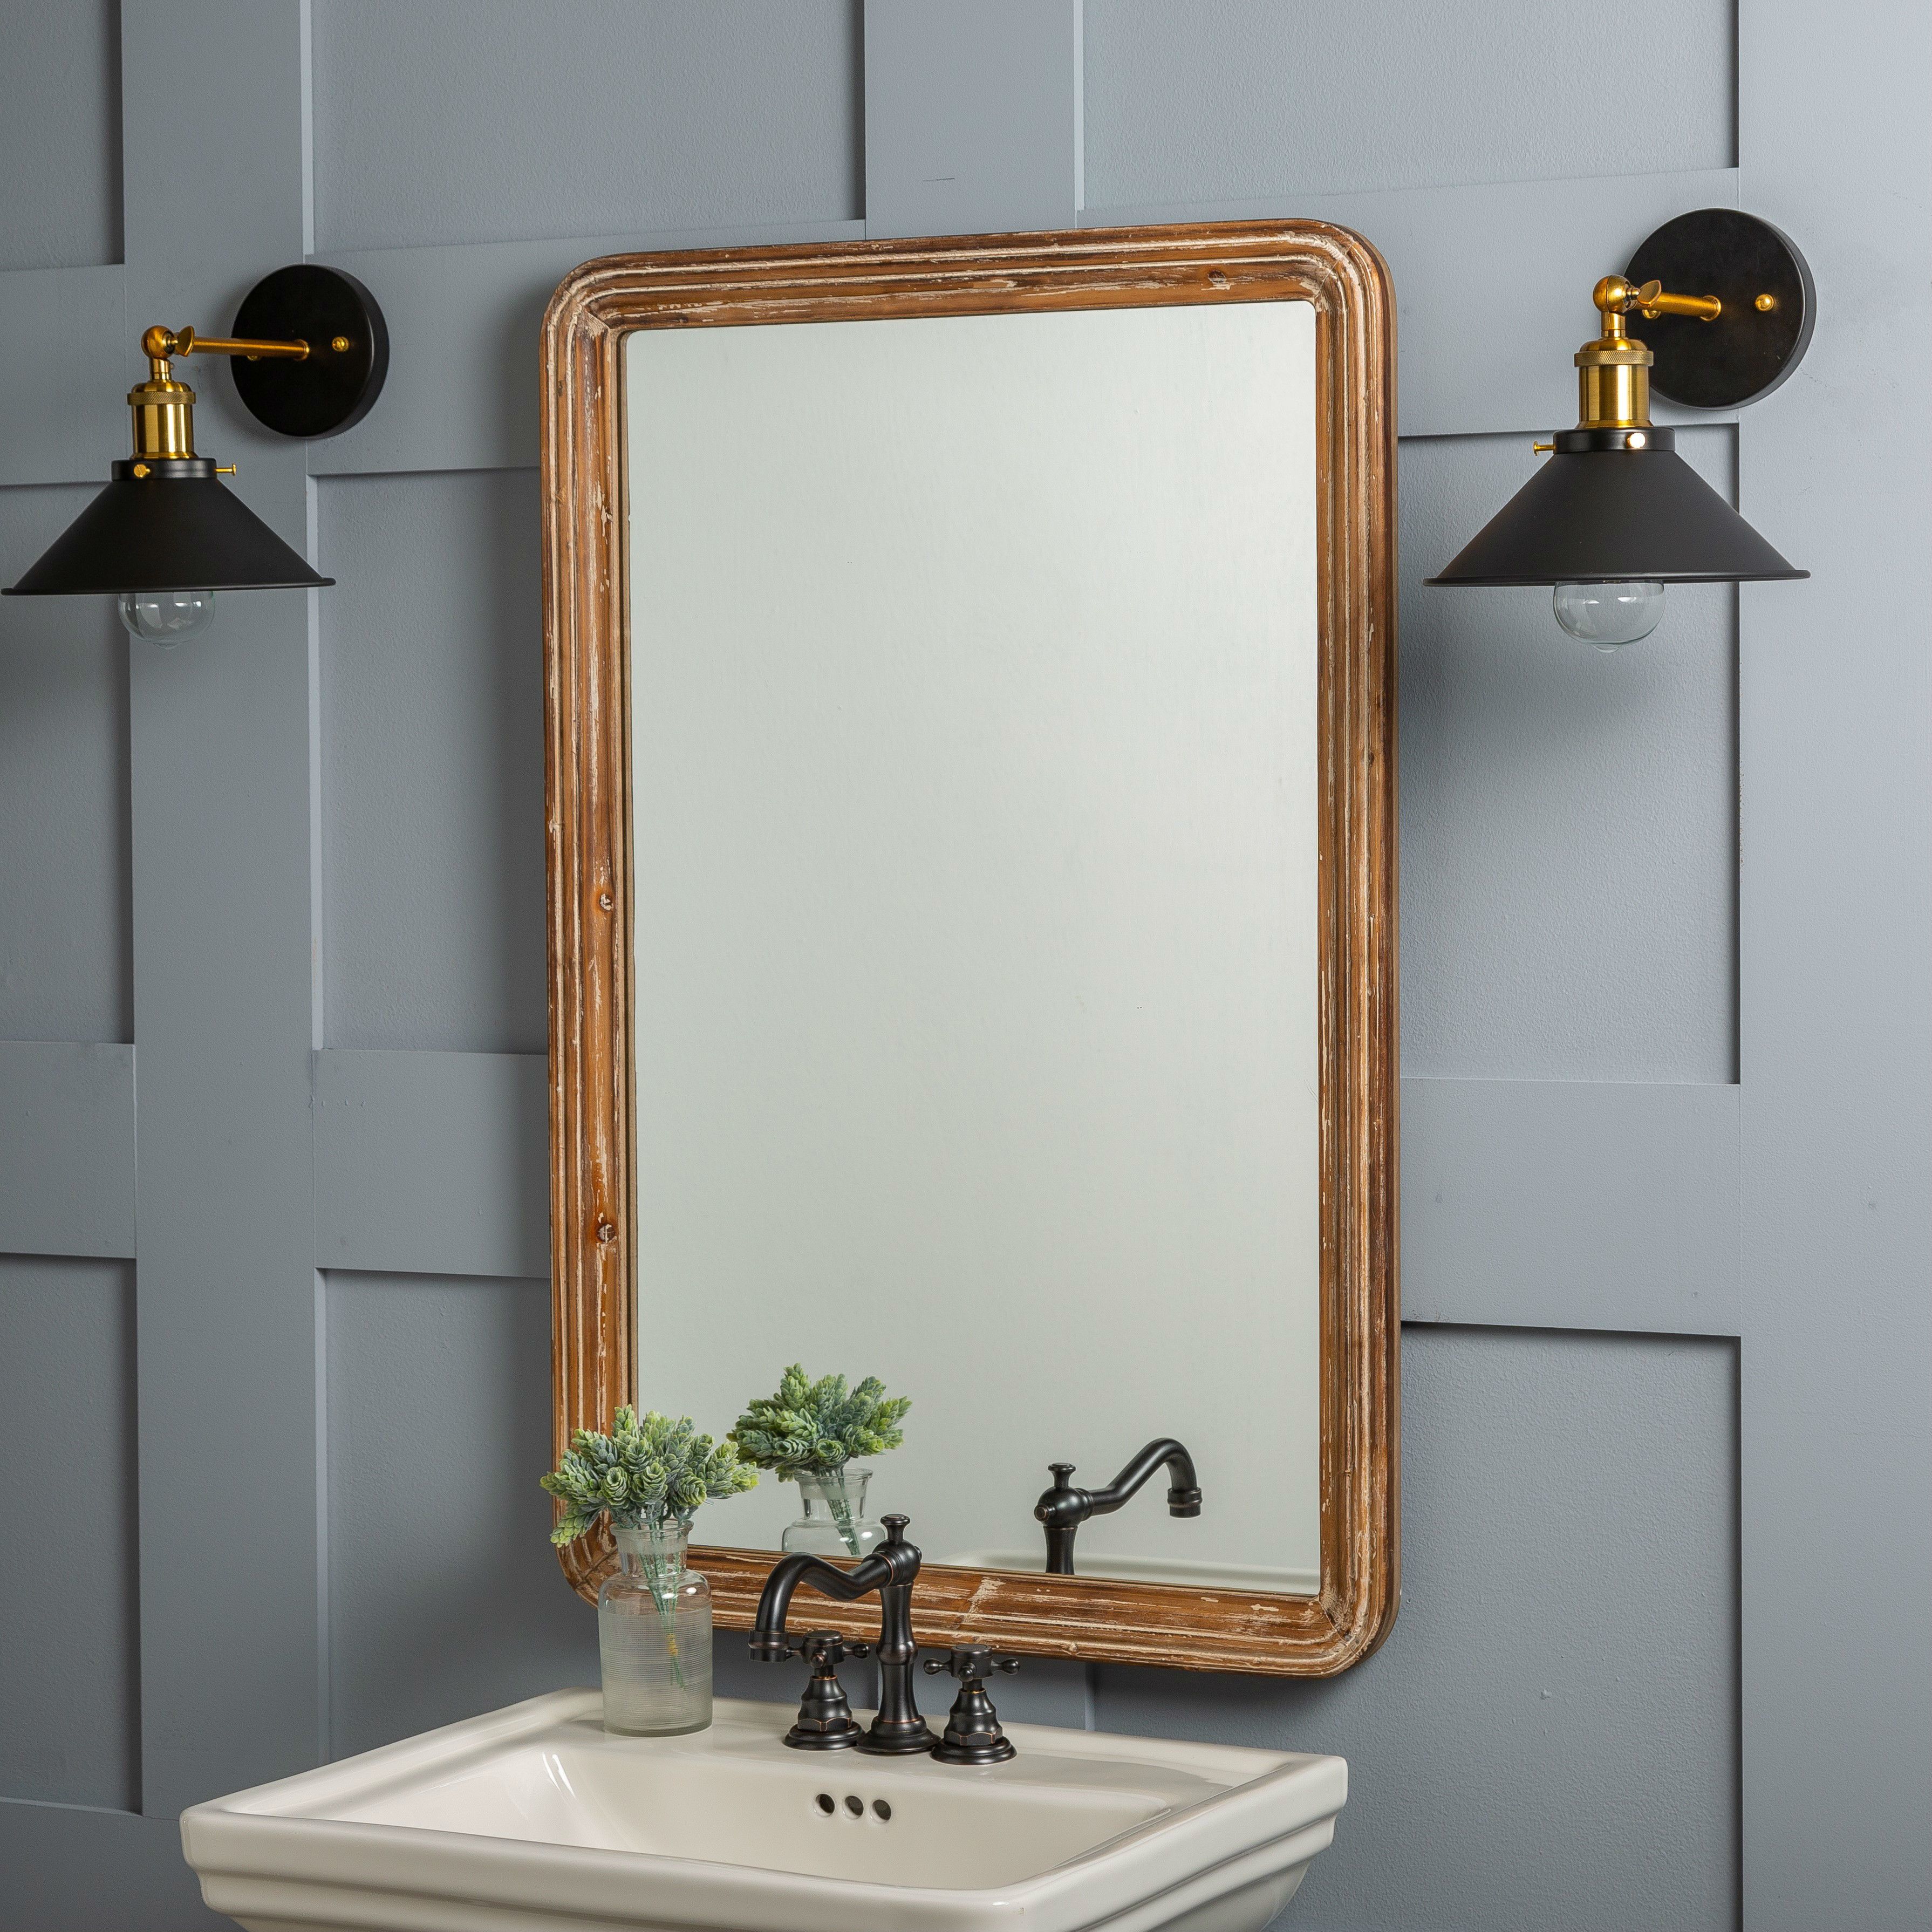 Luman Wall Mirror Throughout Polen Traditional Wall Mirrors (View 13 of 30)